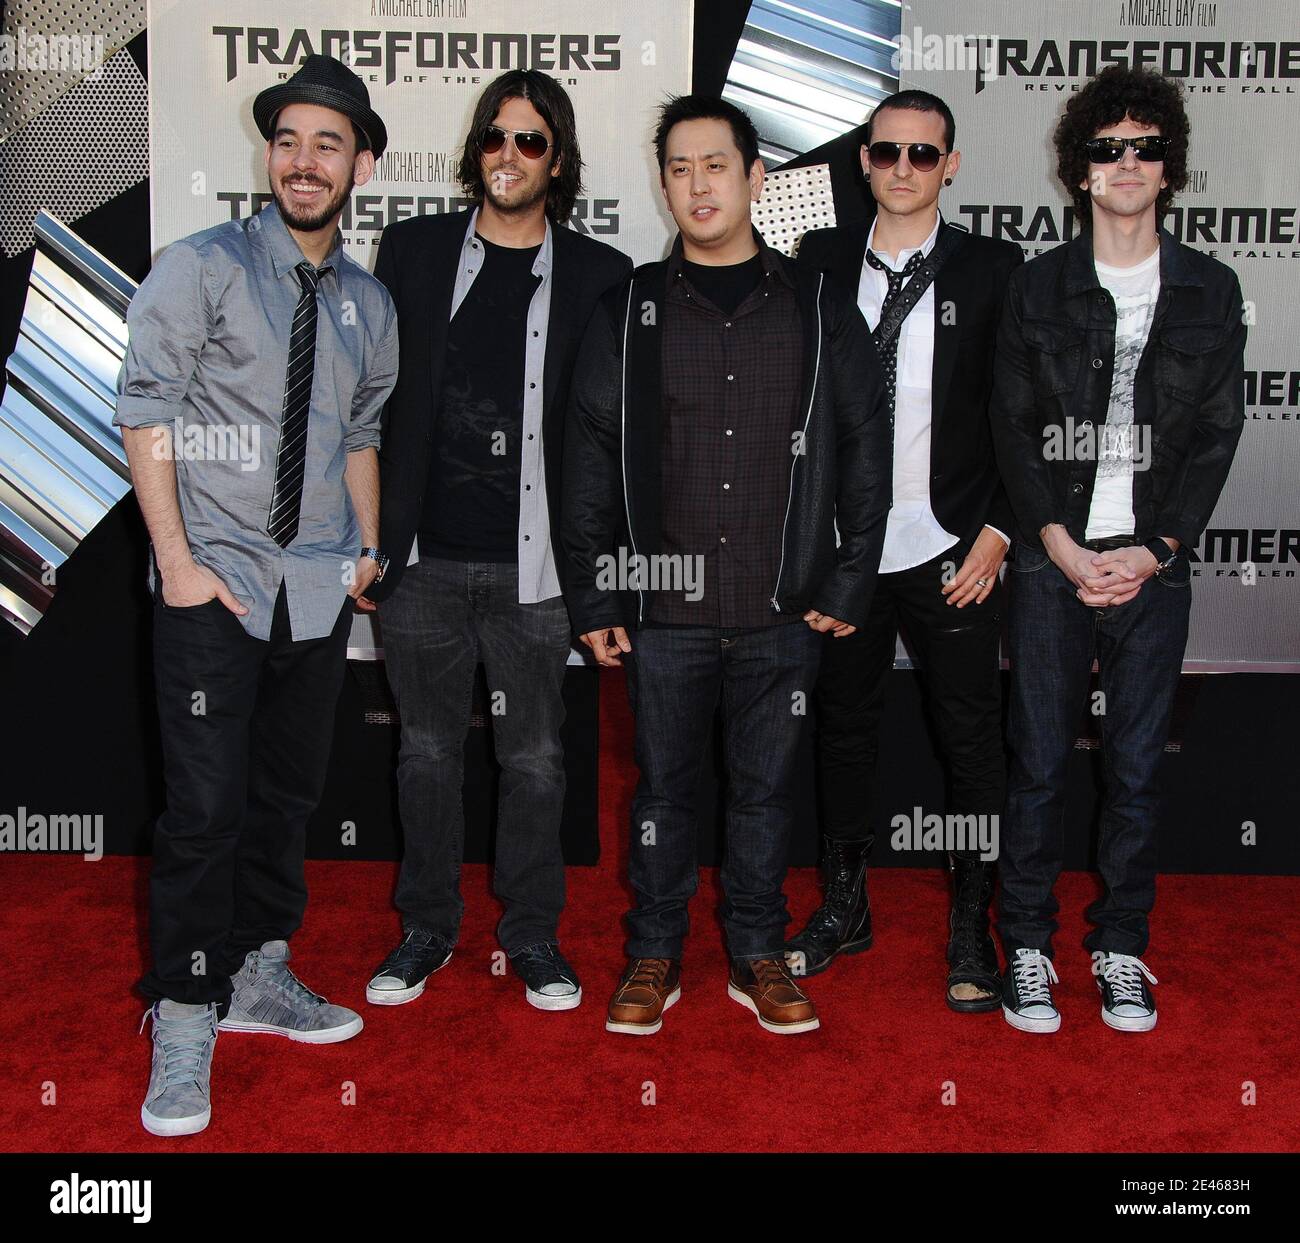 Linkin Park (Pictured: Linkin Park, Brad Delson, Chester Bennington, Joe Hahn, Mike Shinoda, Phoenix, Rob Bourdon) attend the premiere of 'Transformers: Revenge of the Fallen' held at the Mann's Village Theatre in Westwood, Los Angeles, CA, USA on June 22, 2009. Photo by Lionel Hahn/ABACAPRESS.COM Stock Photo